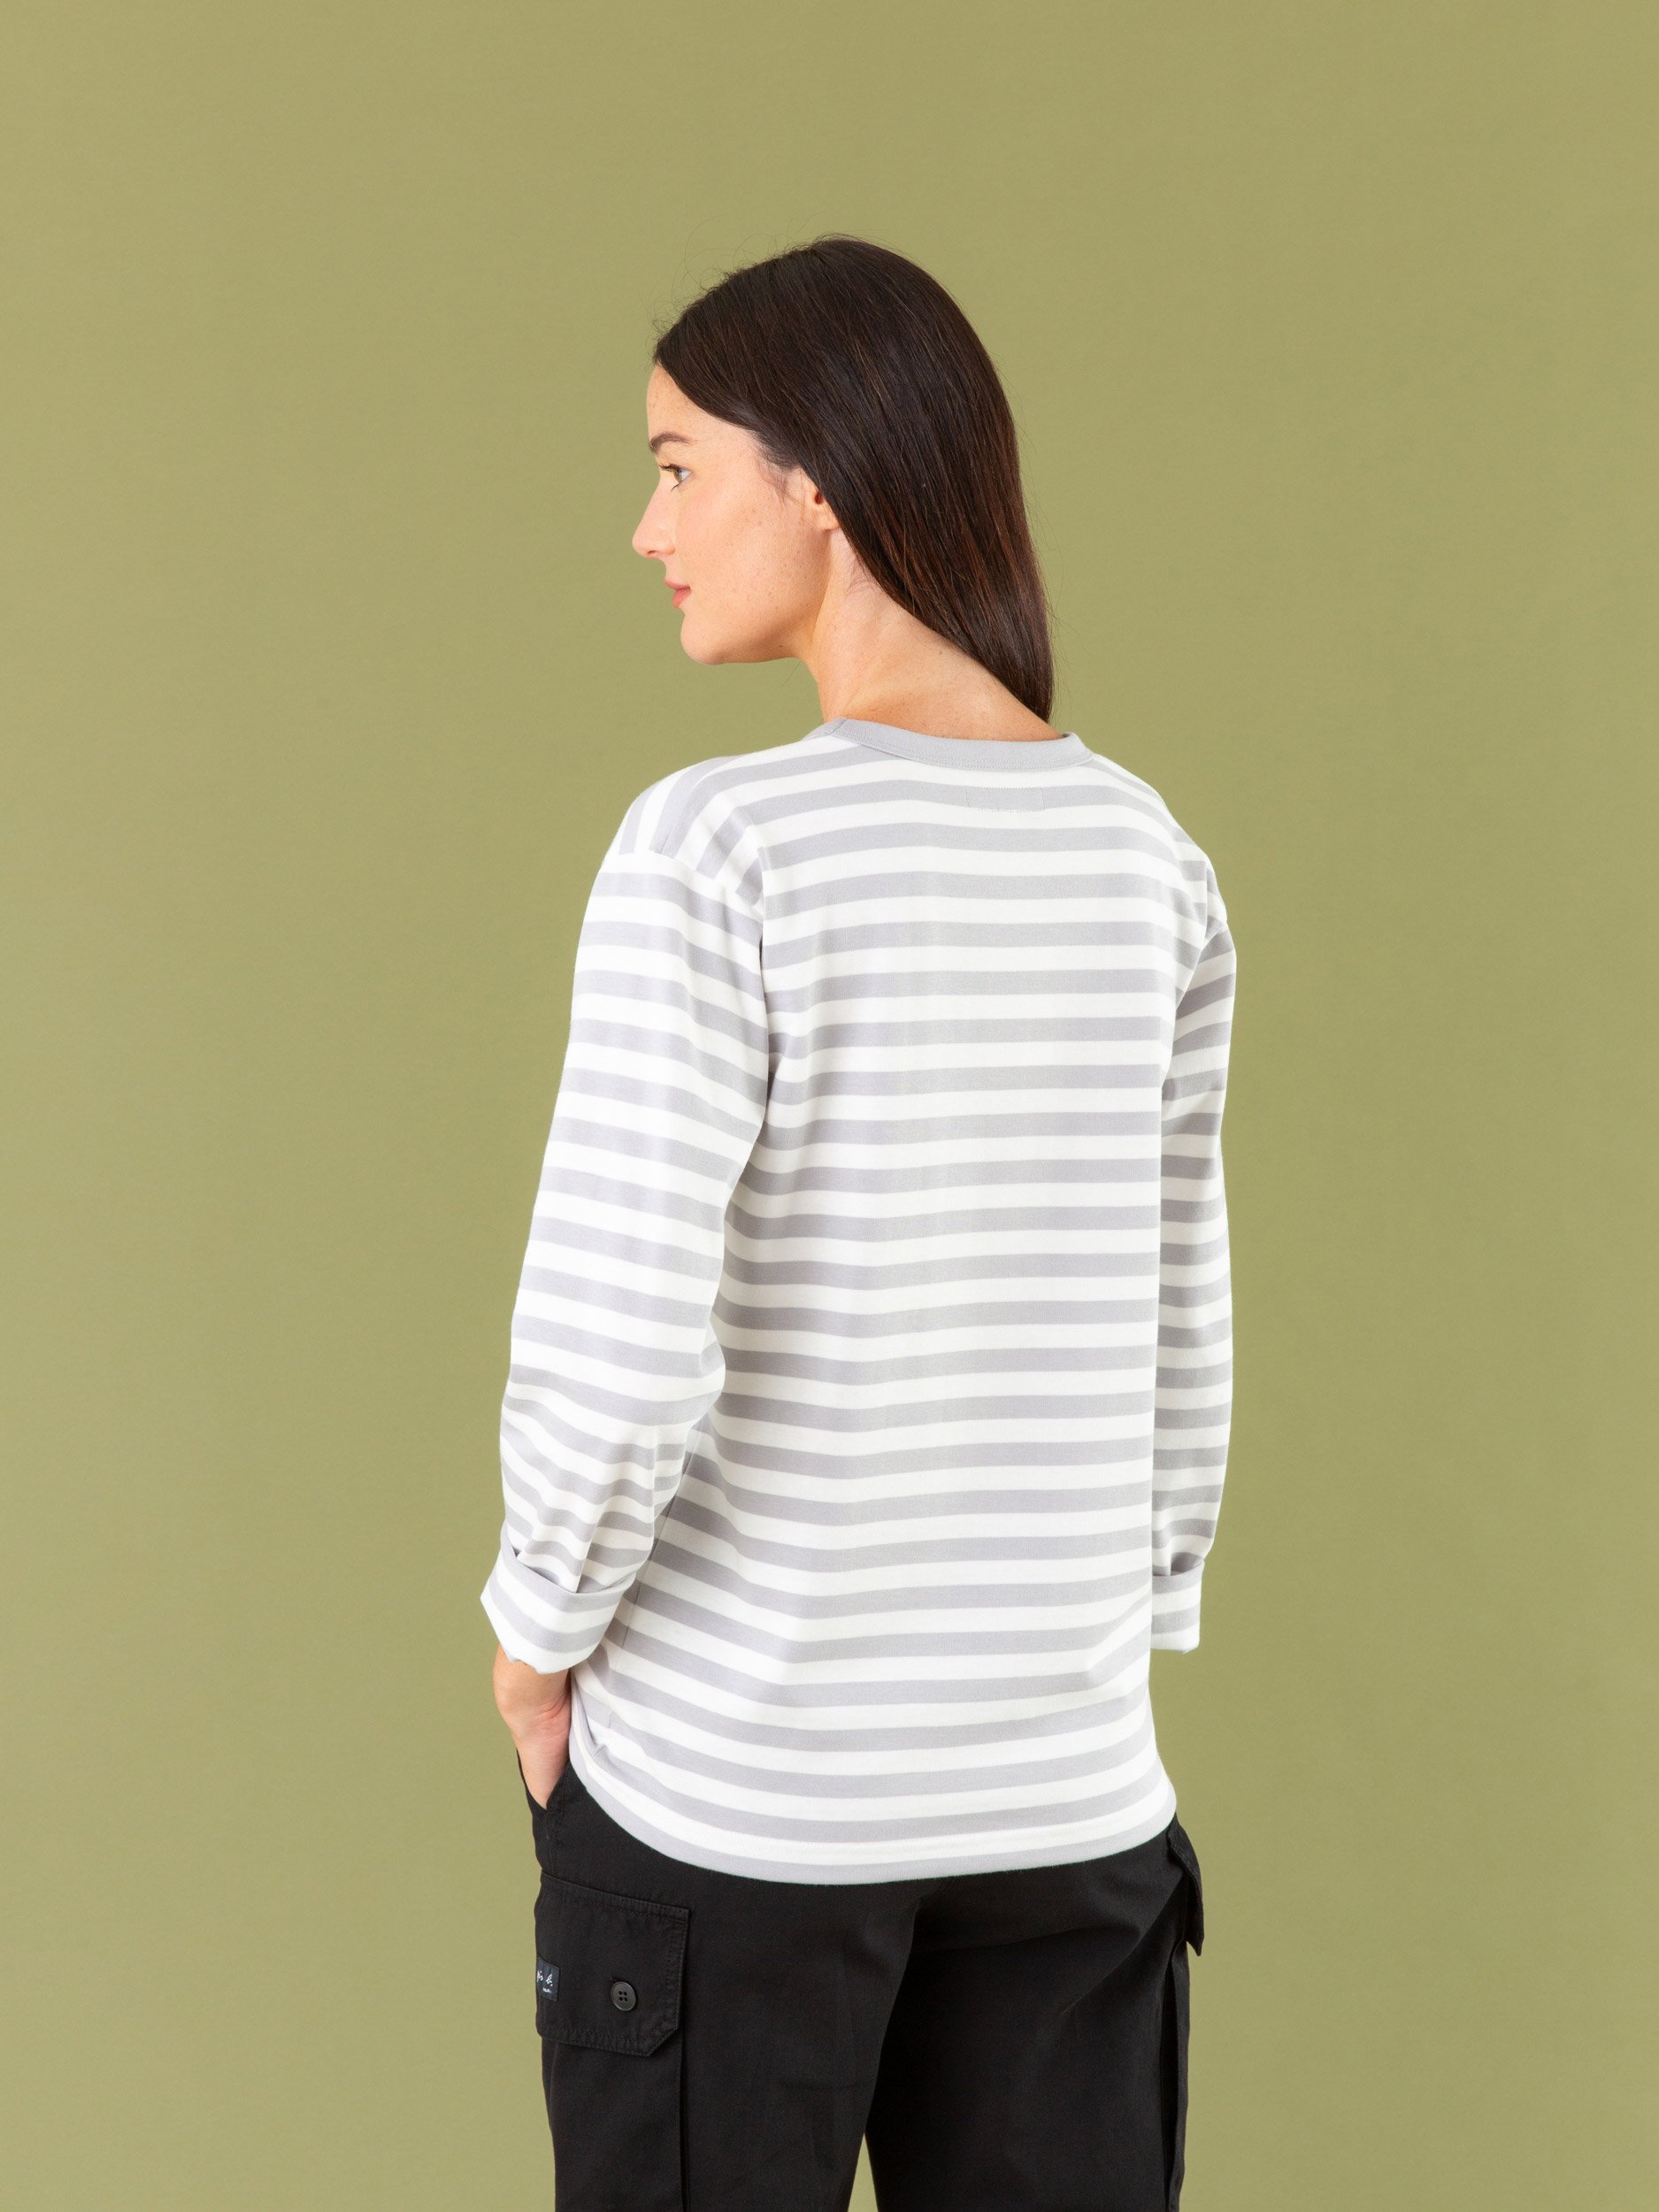 grey and white striped cool t-shirt